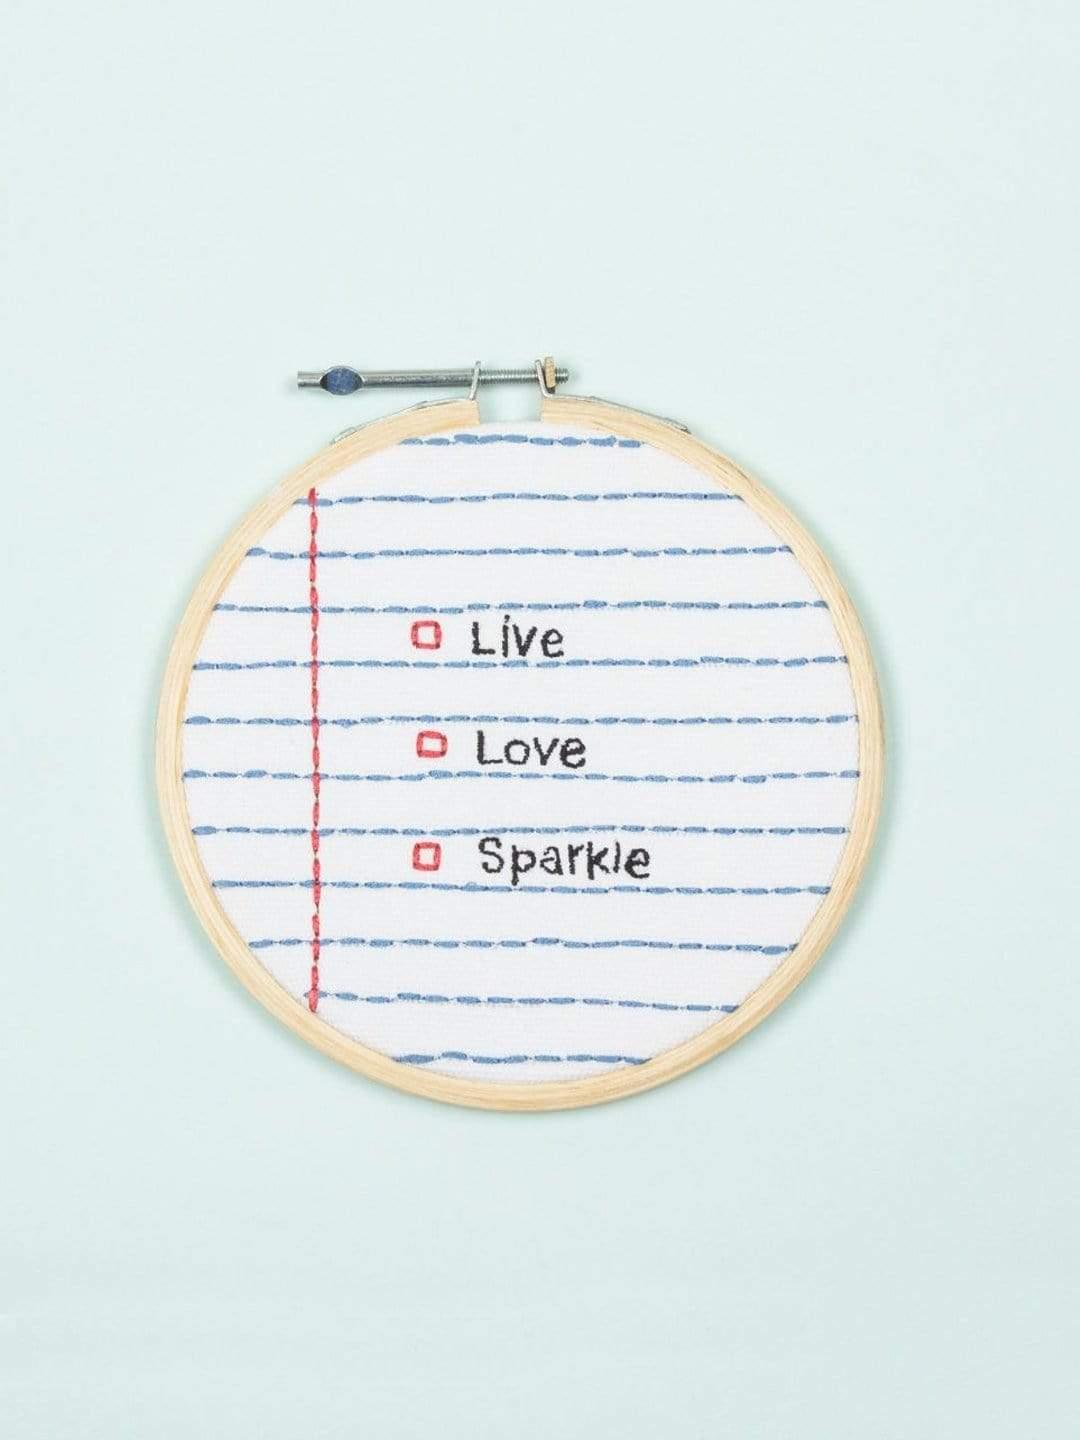 Live Love Sparkle Wall HoopMaterial: Embroidered Fabric with Wooden Frame
Dimensions: 6.5 Dia inches

Keep away from dust and moisture.

Our products are handmade, one piece at a time, and theLive Love Sparkle Wall Hoop